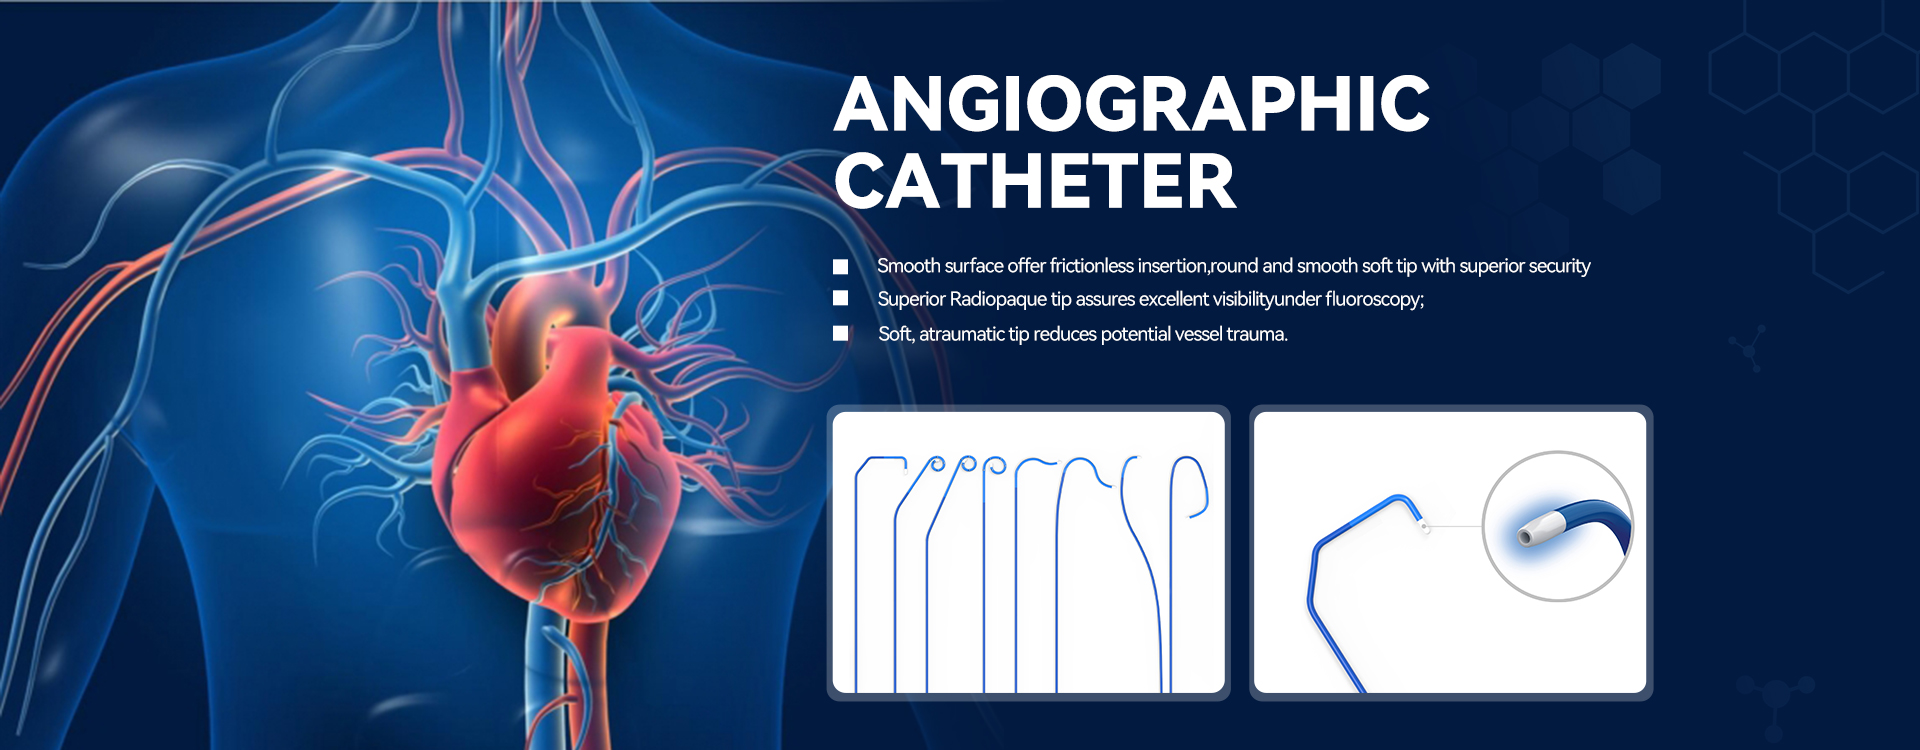 CFDA 22 years of experience in the cardiovascular catheter